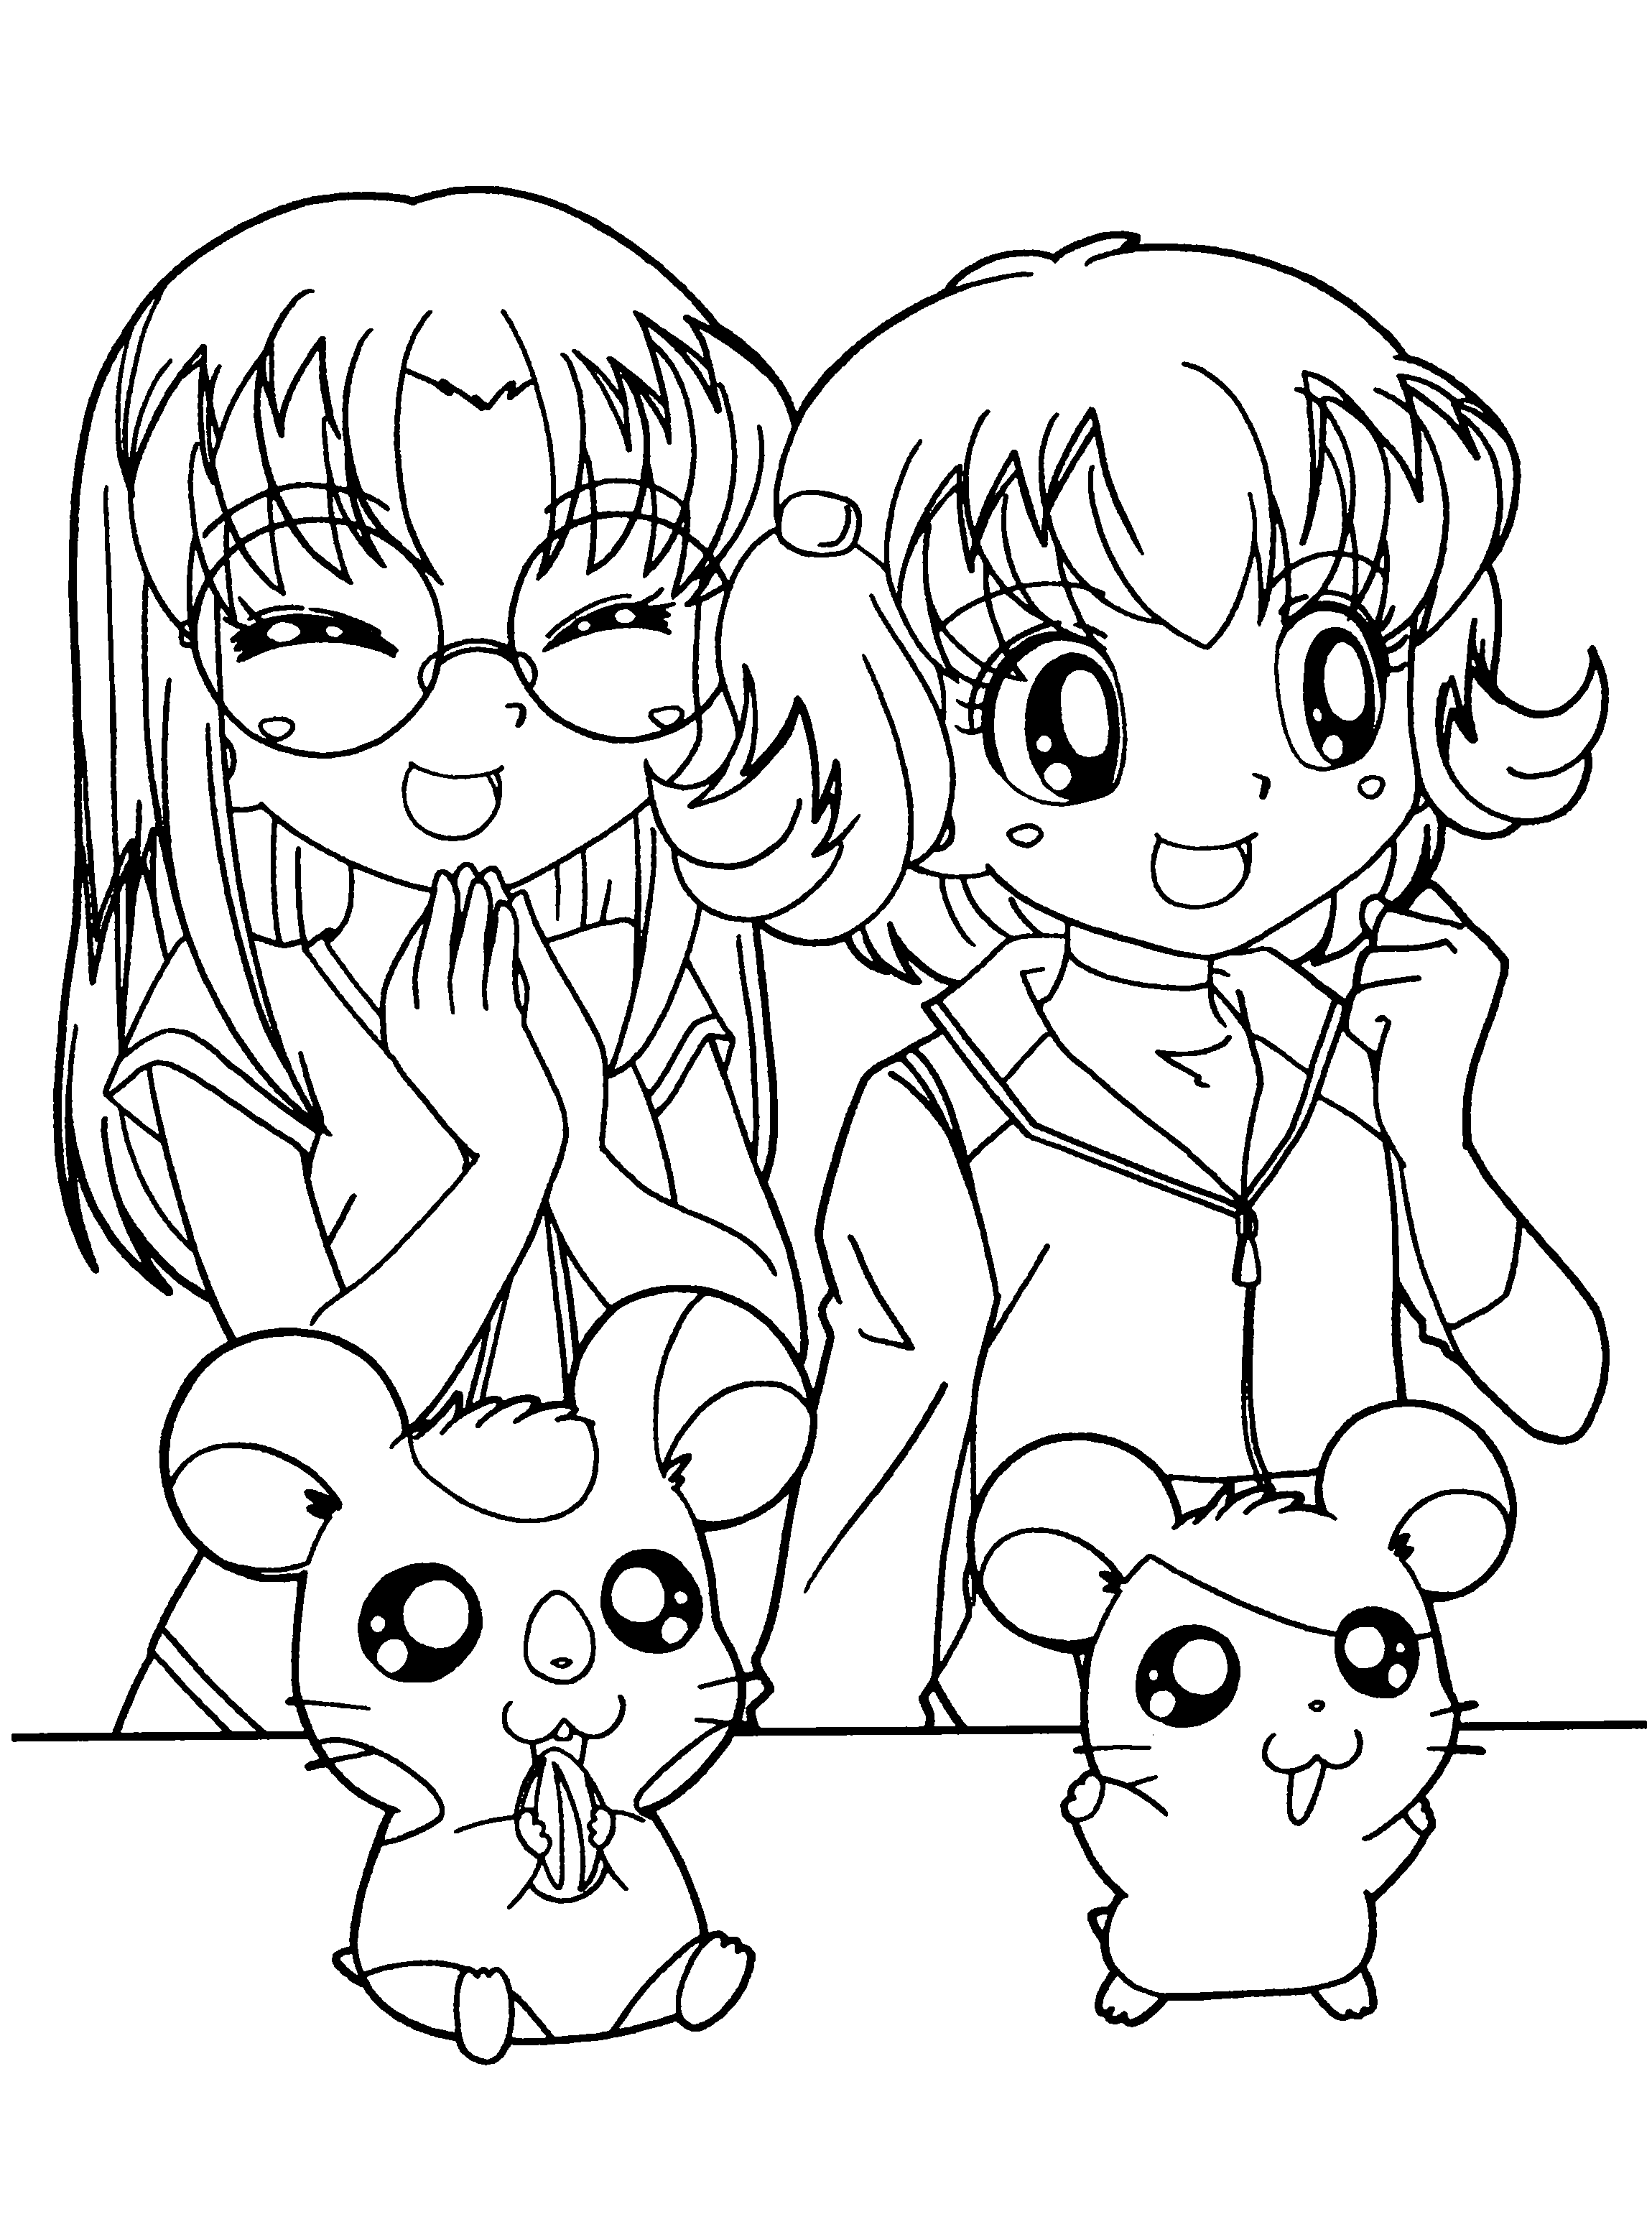 Coloring Page - Hamtaro coloring pages 24